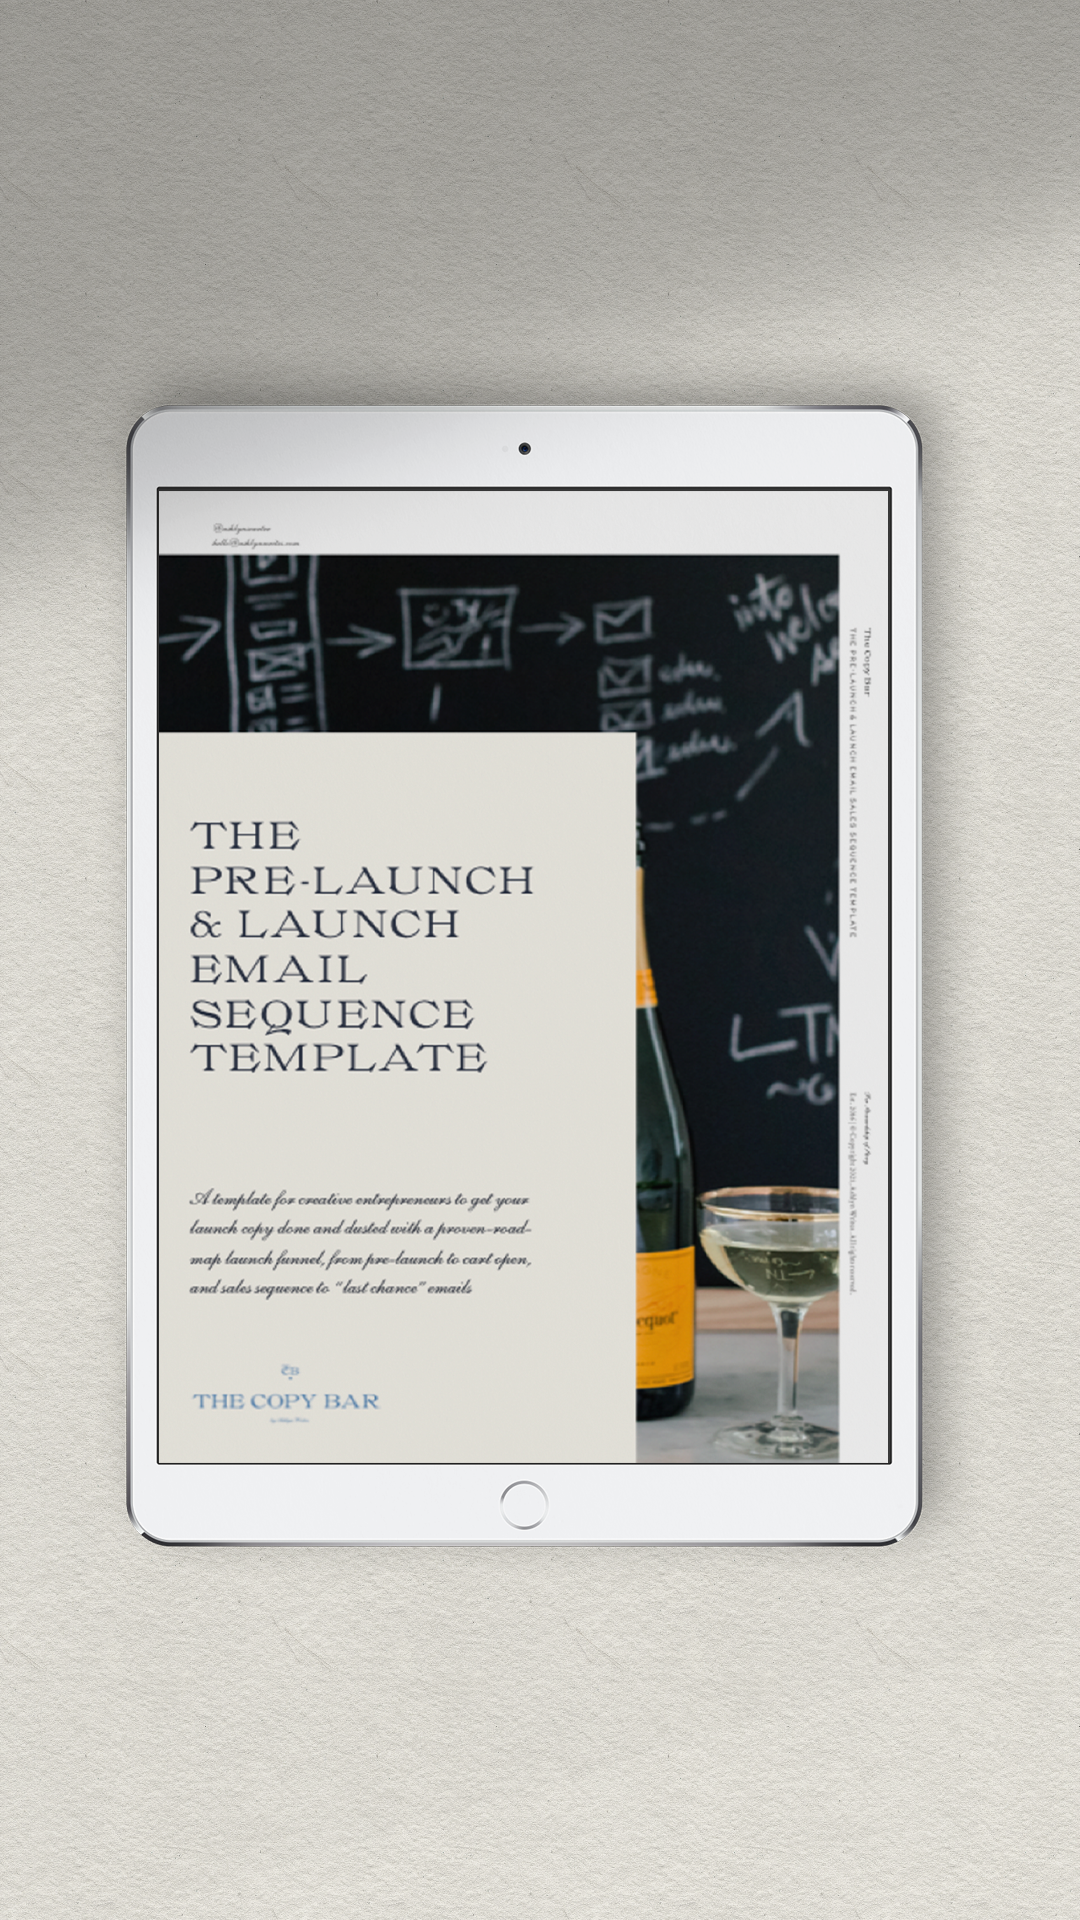 The Sales & Launch Email Sequence Template